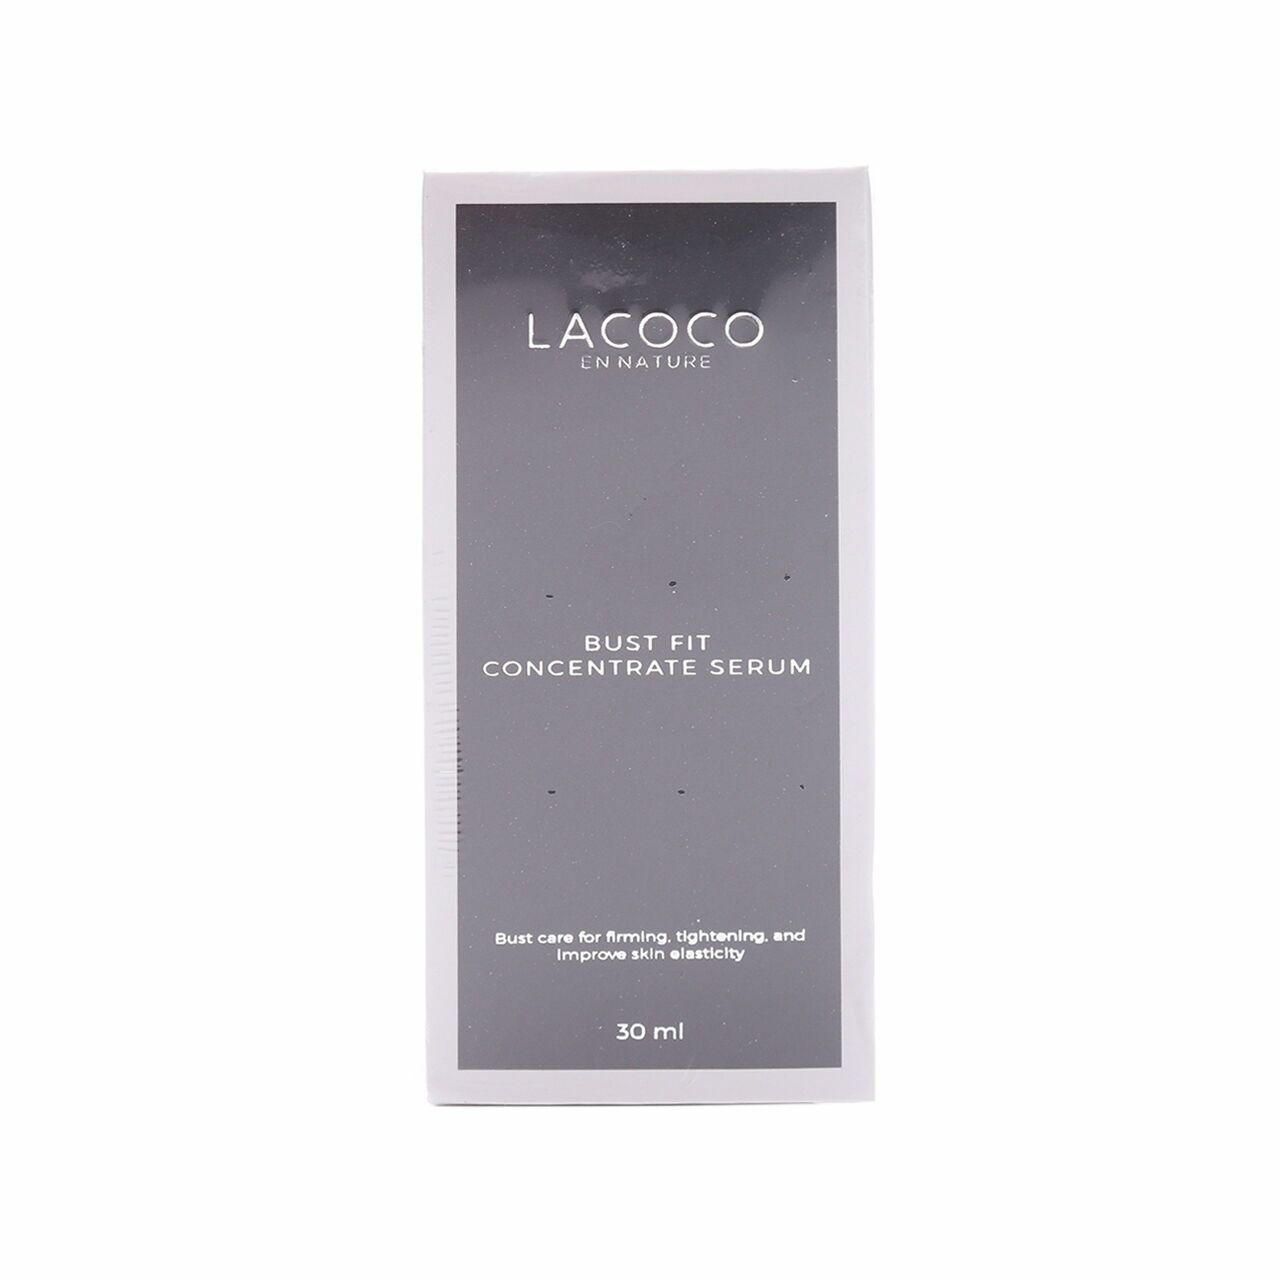 Lacoco Bust Fit Concentrate Serum Skin Care